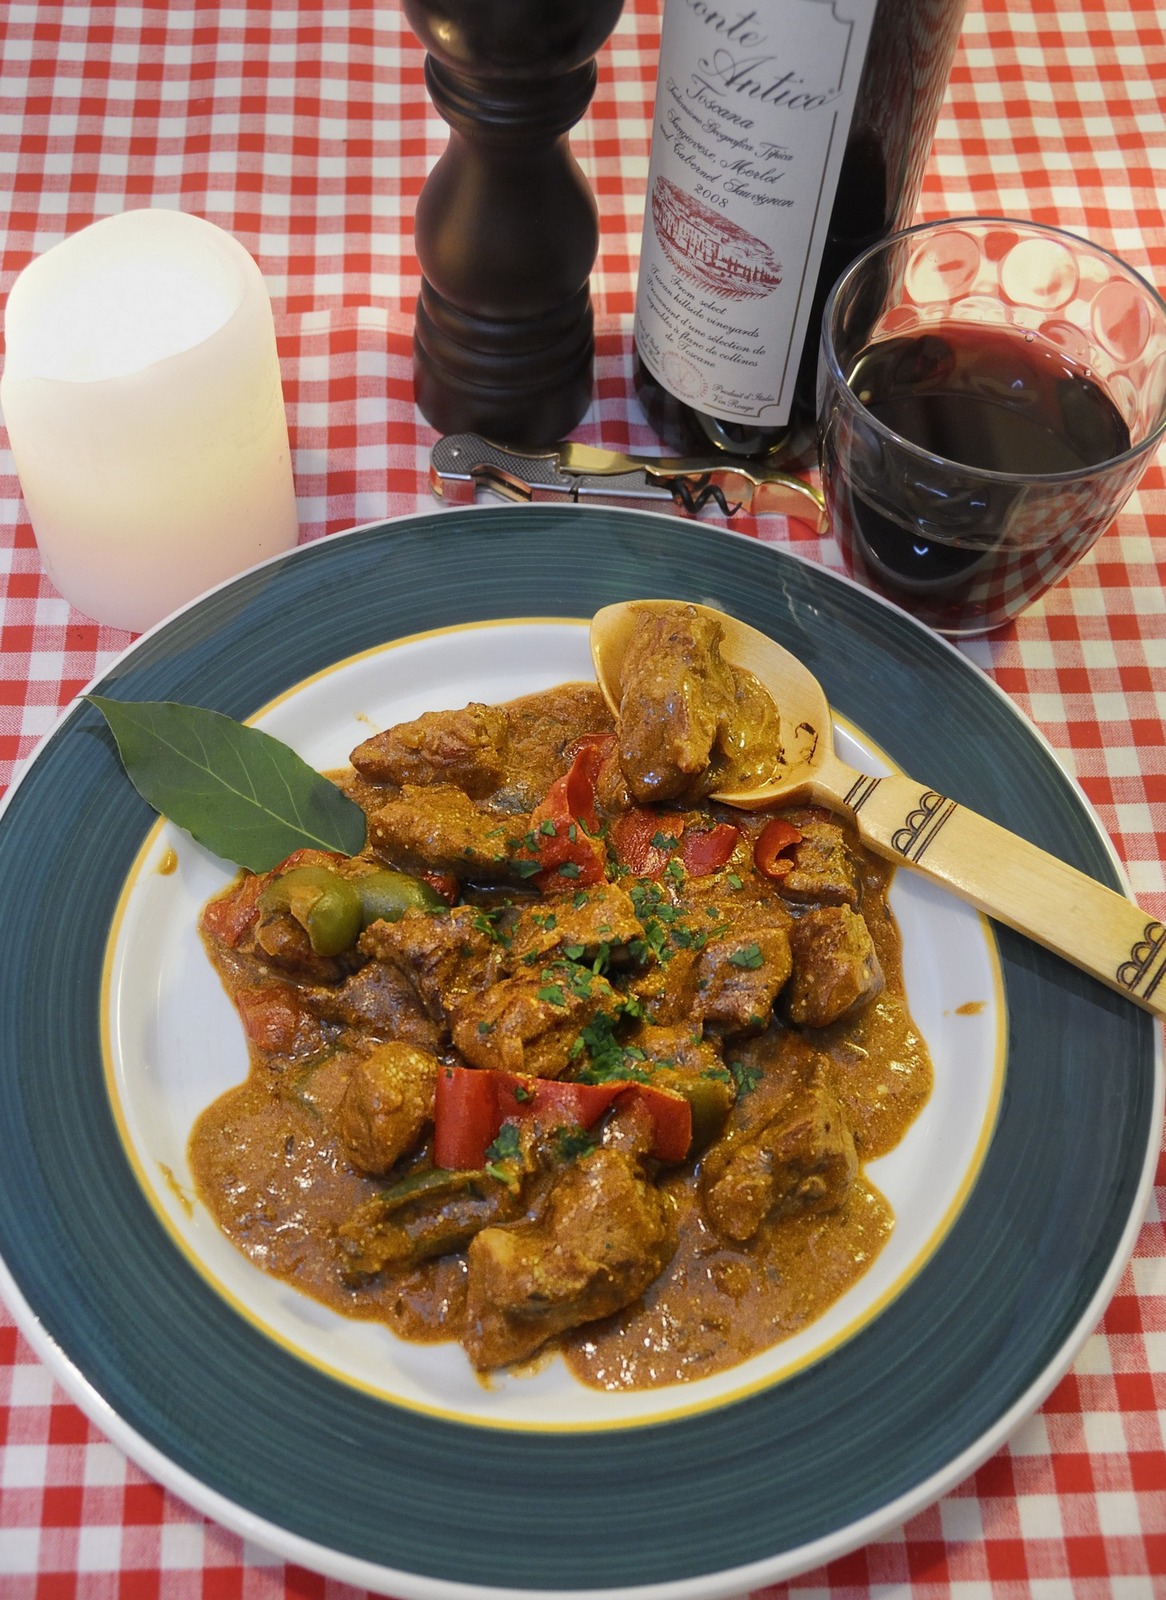 Hungarian Pork Goulash, Wooden Spoon, Red Wine, Red Checked Tablecloth